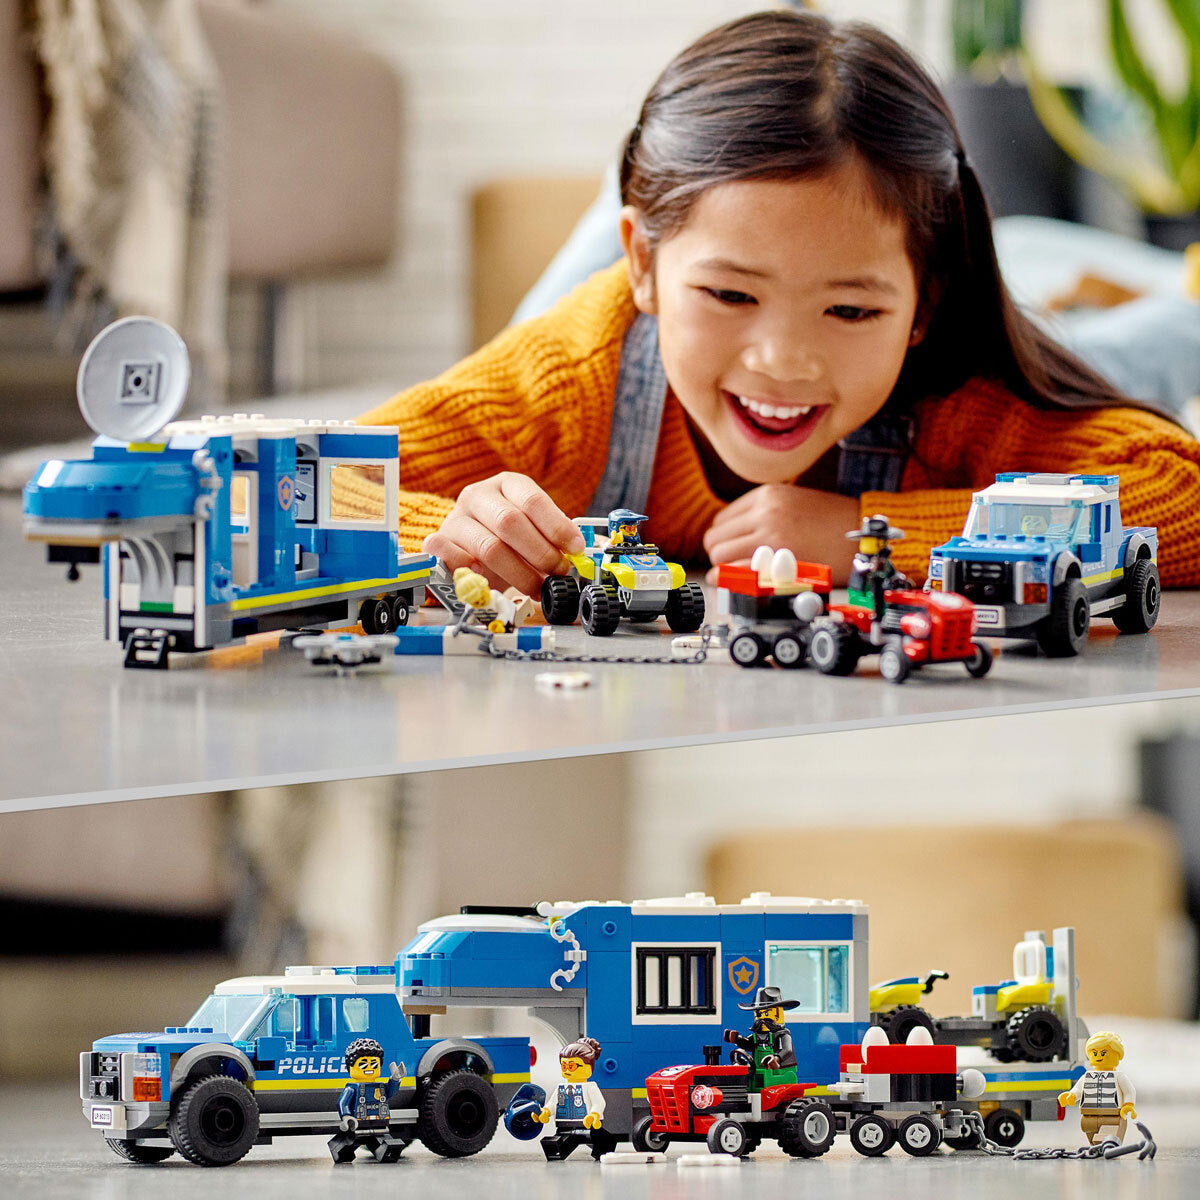 LEGO City - Police Mobile Command Truck 60315